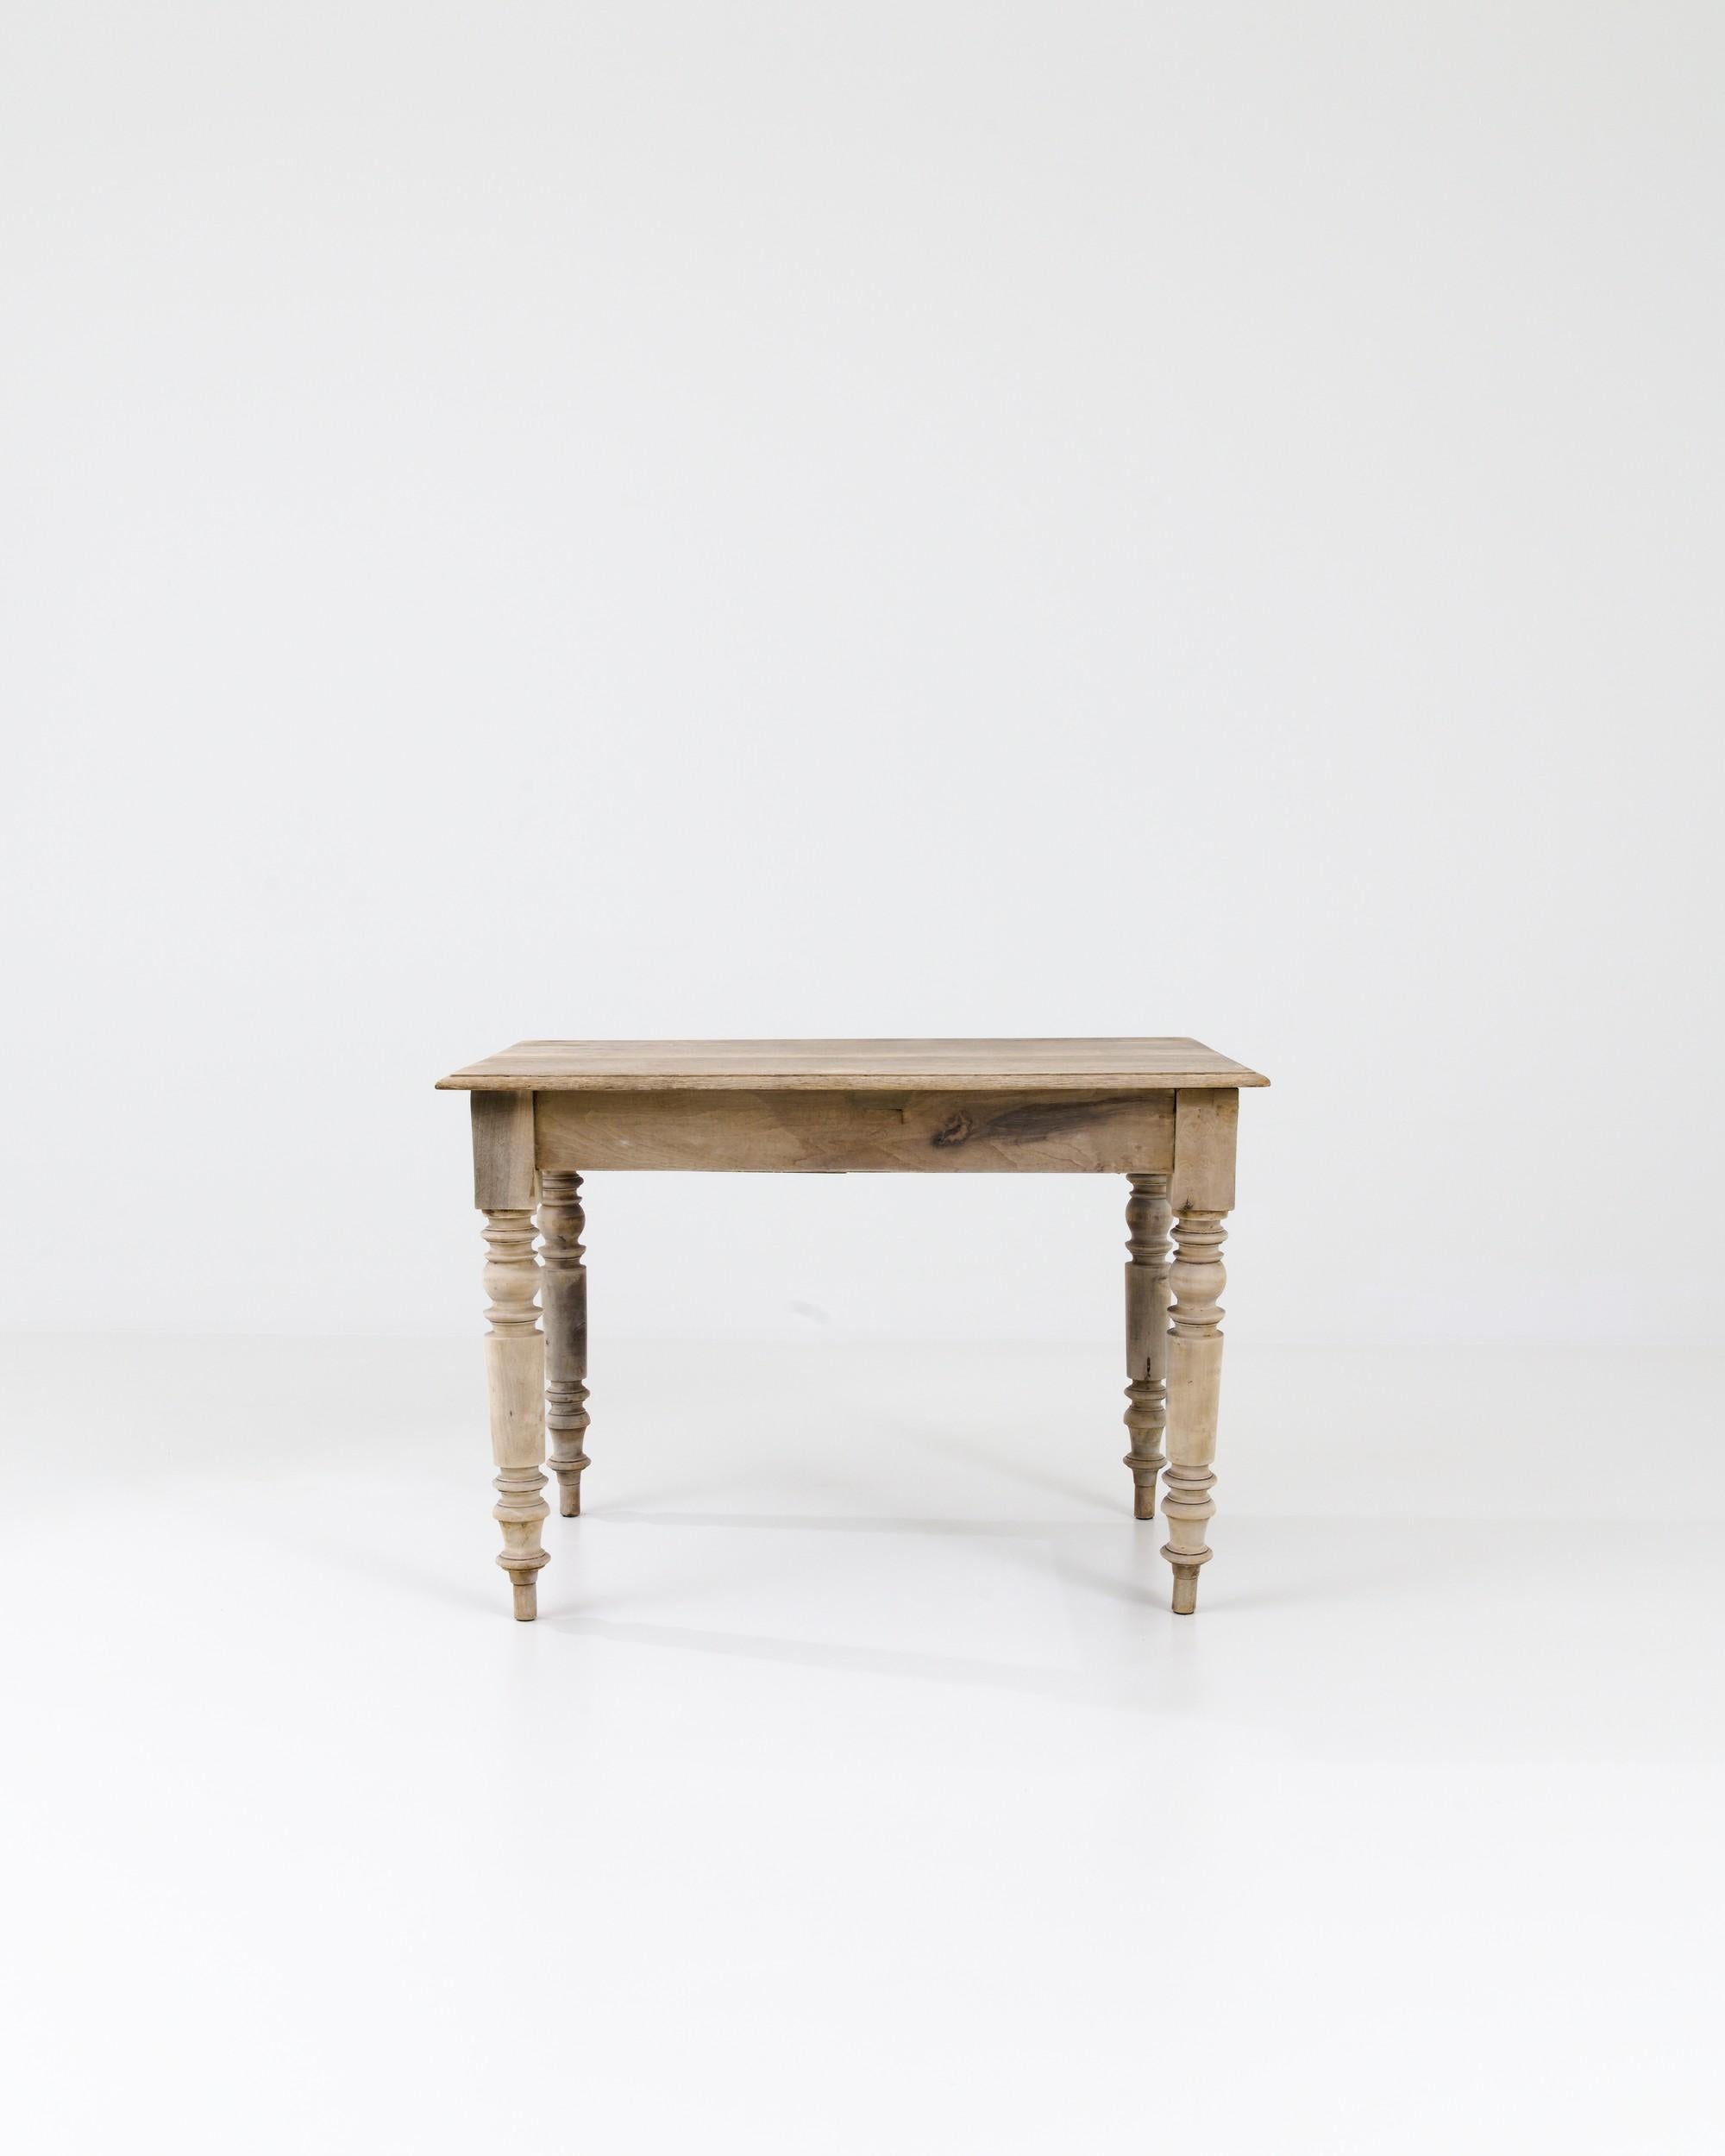 A eye-catching silhouette and a warm organic finish make this antique oak side table a find to treasure. Hand-made in France in the 1800s, turned legs create a strikingly elaborate profile, creating a flamboyant contrast with the simple tabletop.